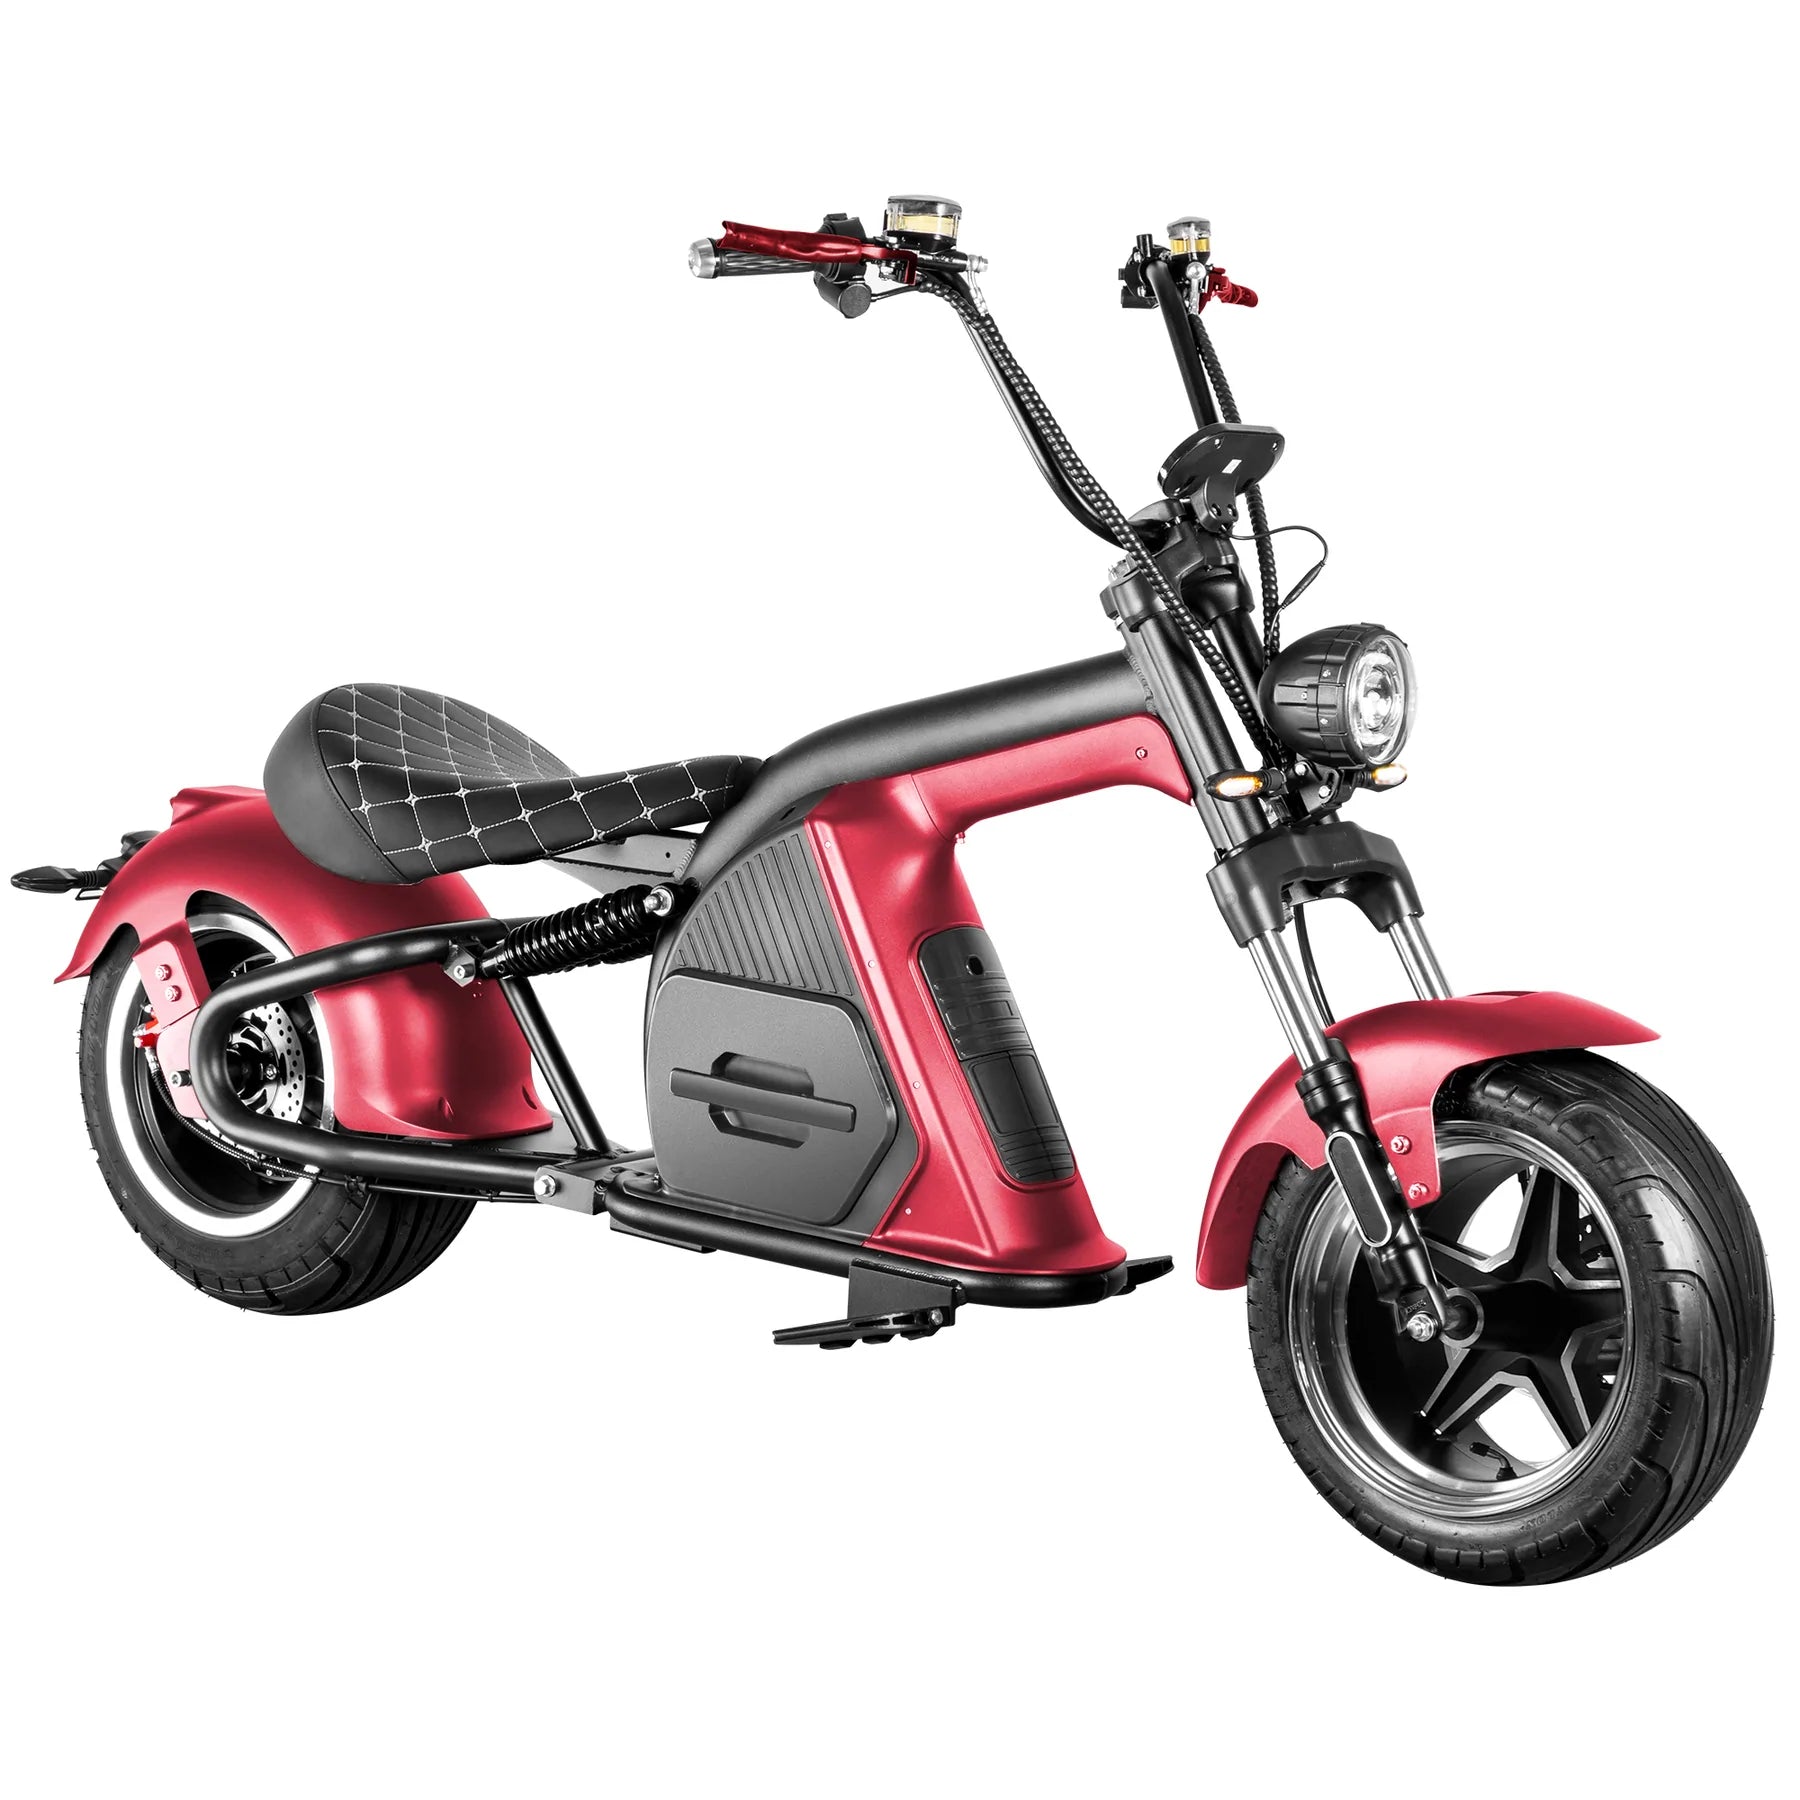 SOVERSKY M8 60V/30AH 2000W Electric Fat Tire Citycoco Chopper Scooter (96168253)